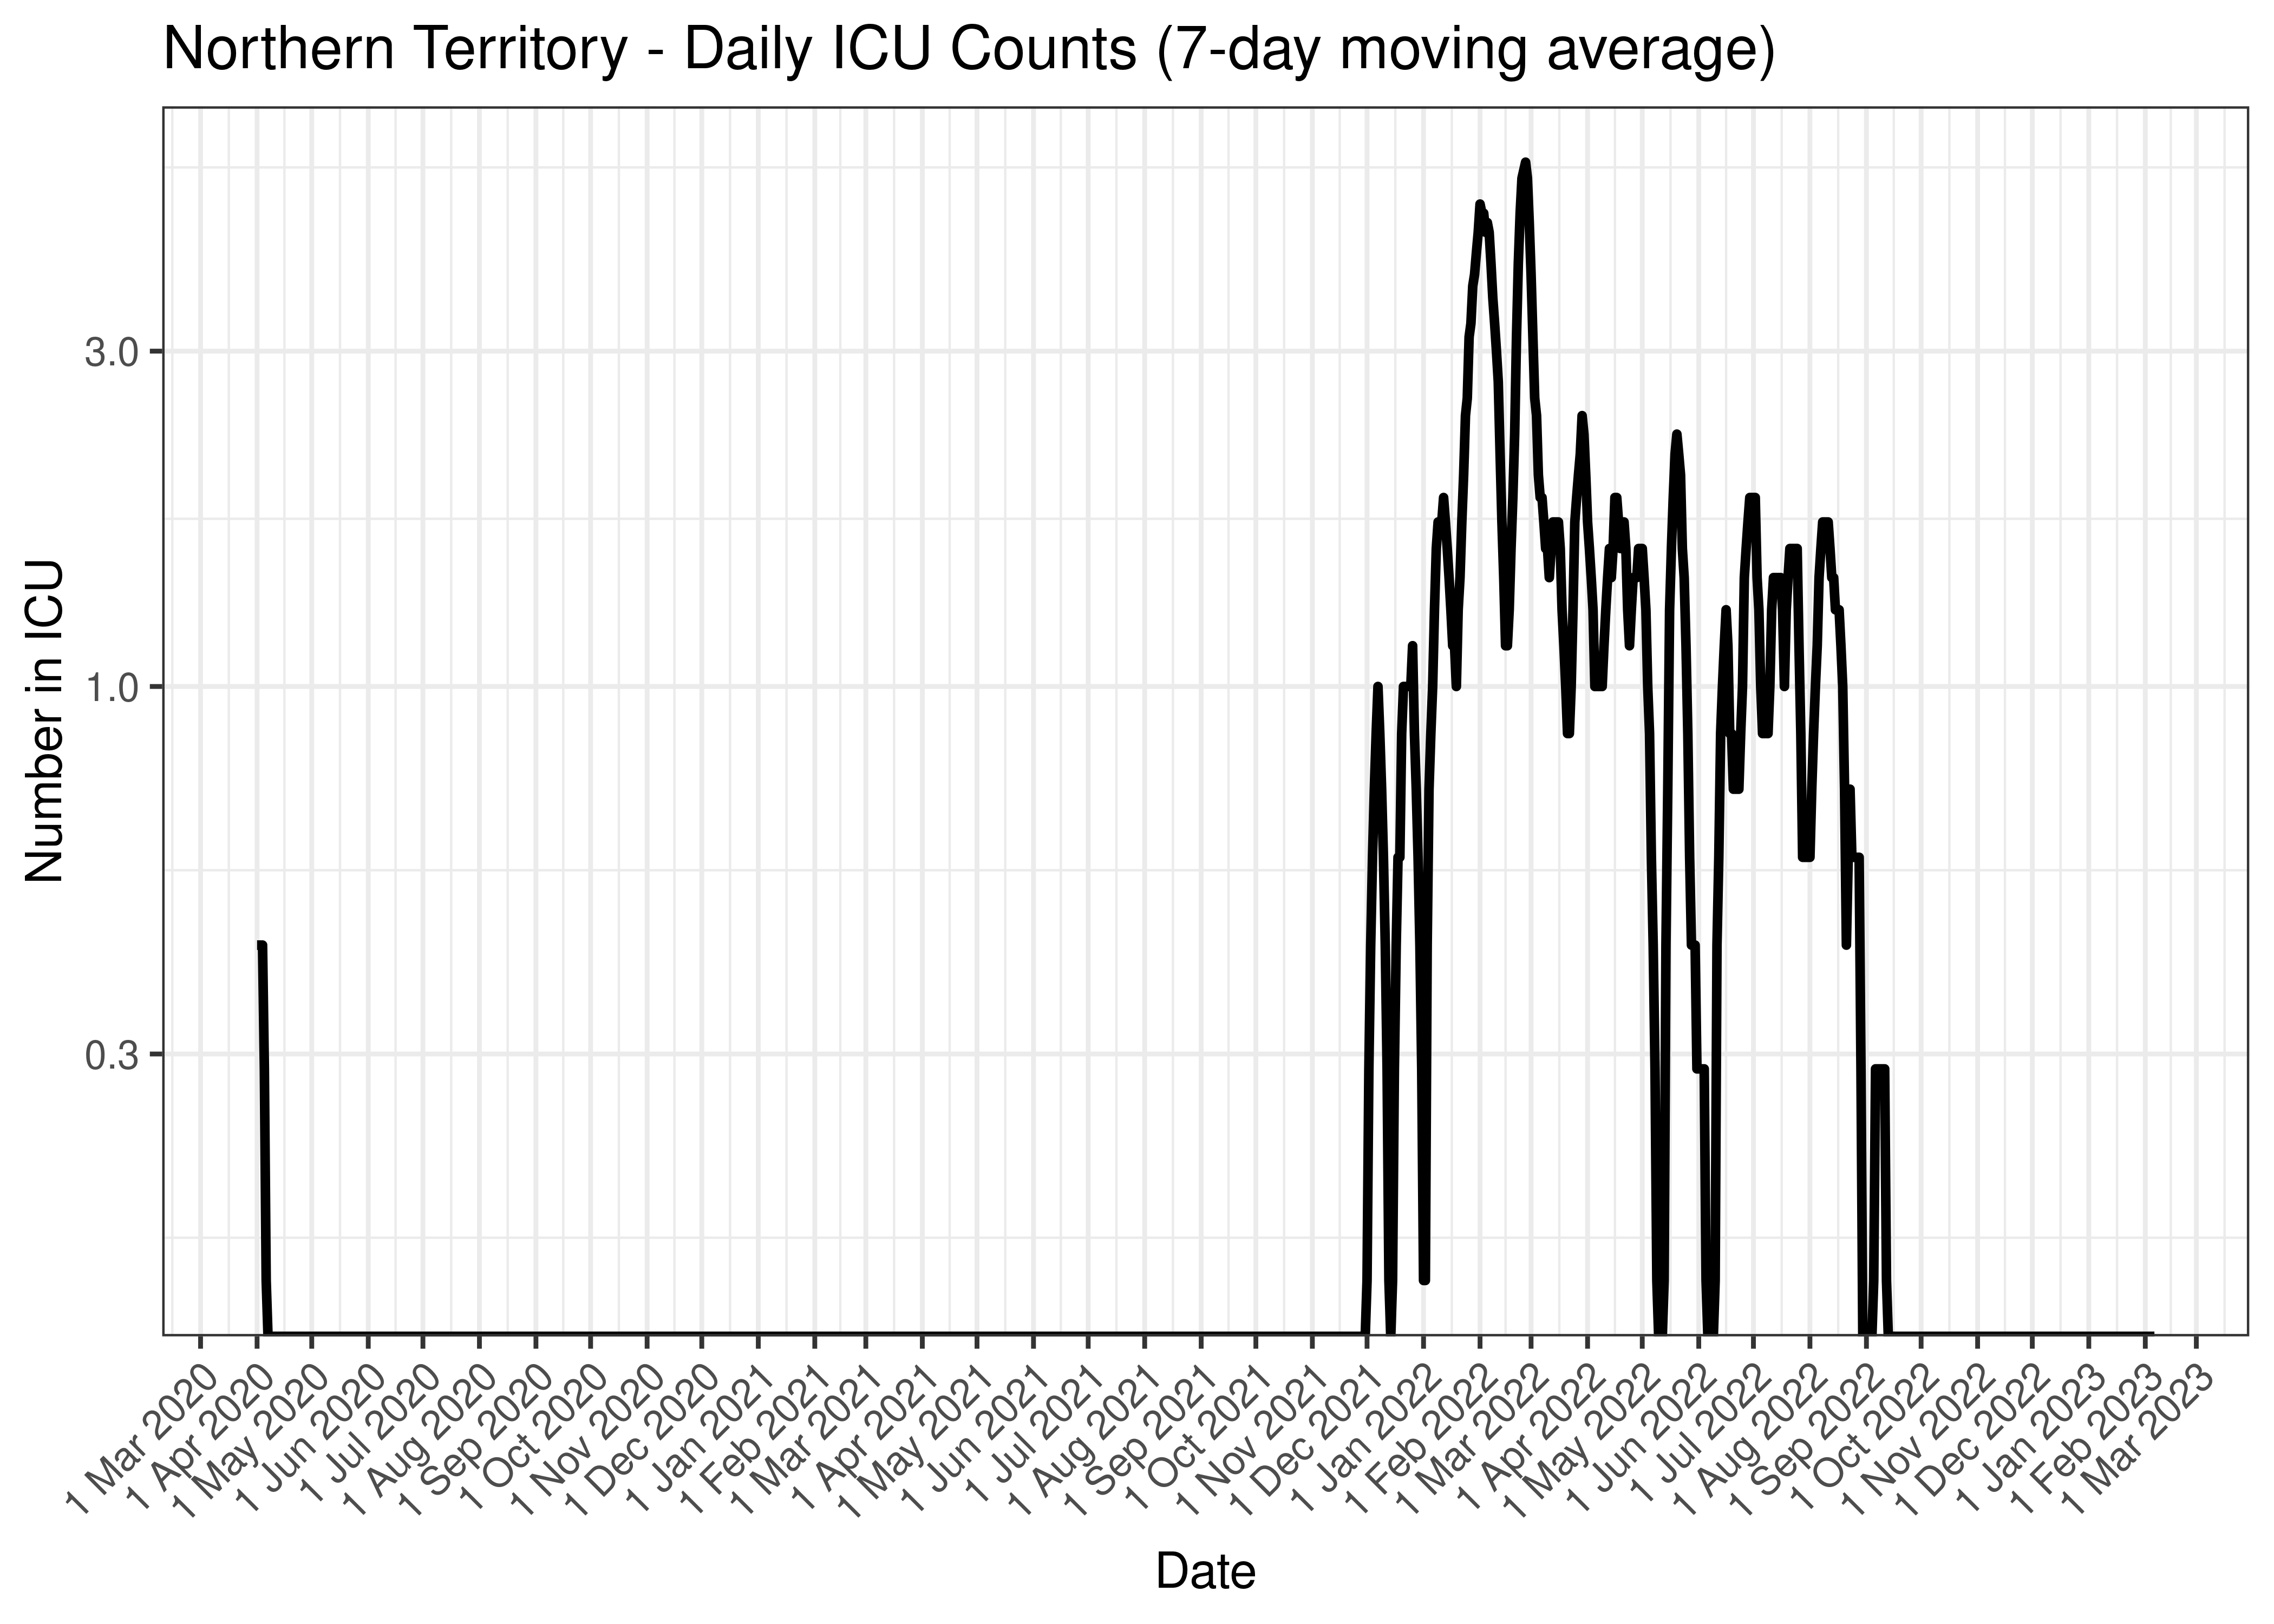 Northern Territory - Daily Cases (7-day moving average)